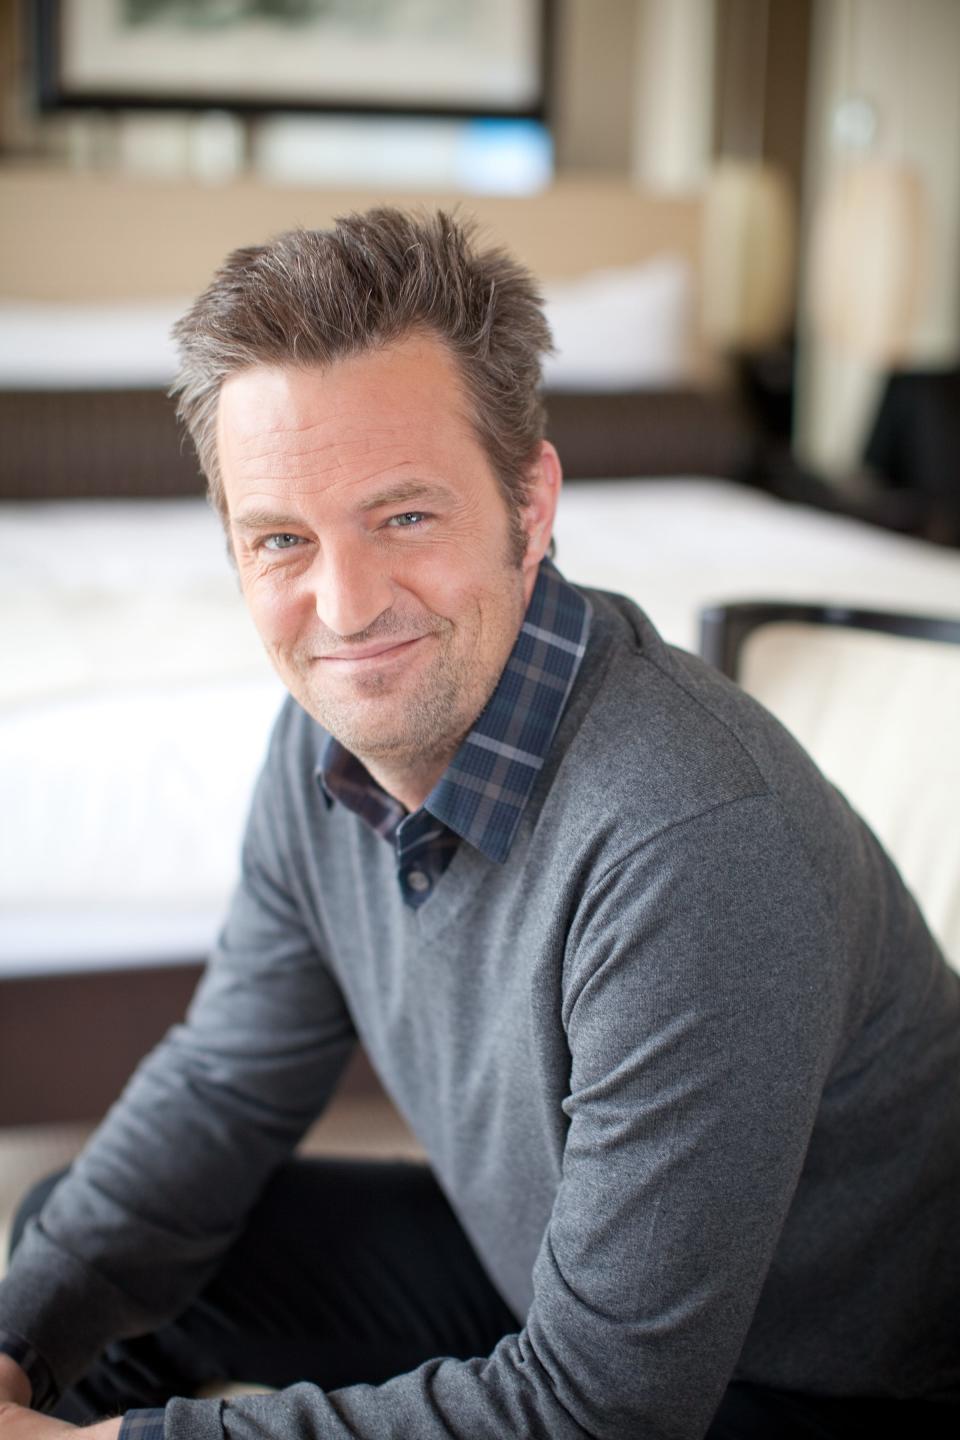 Actor Matthew Perry photographed in New York during a promotional tour for his new television show "Mr. Sunshine," on February 2, 2011.